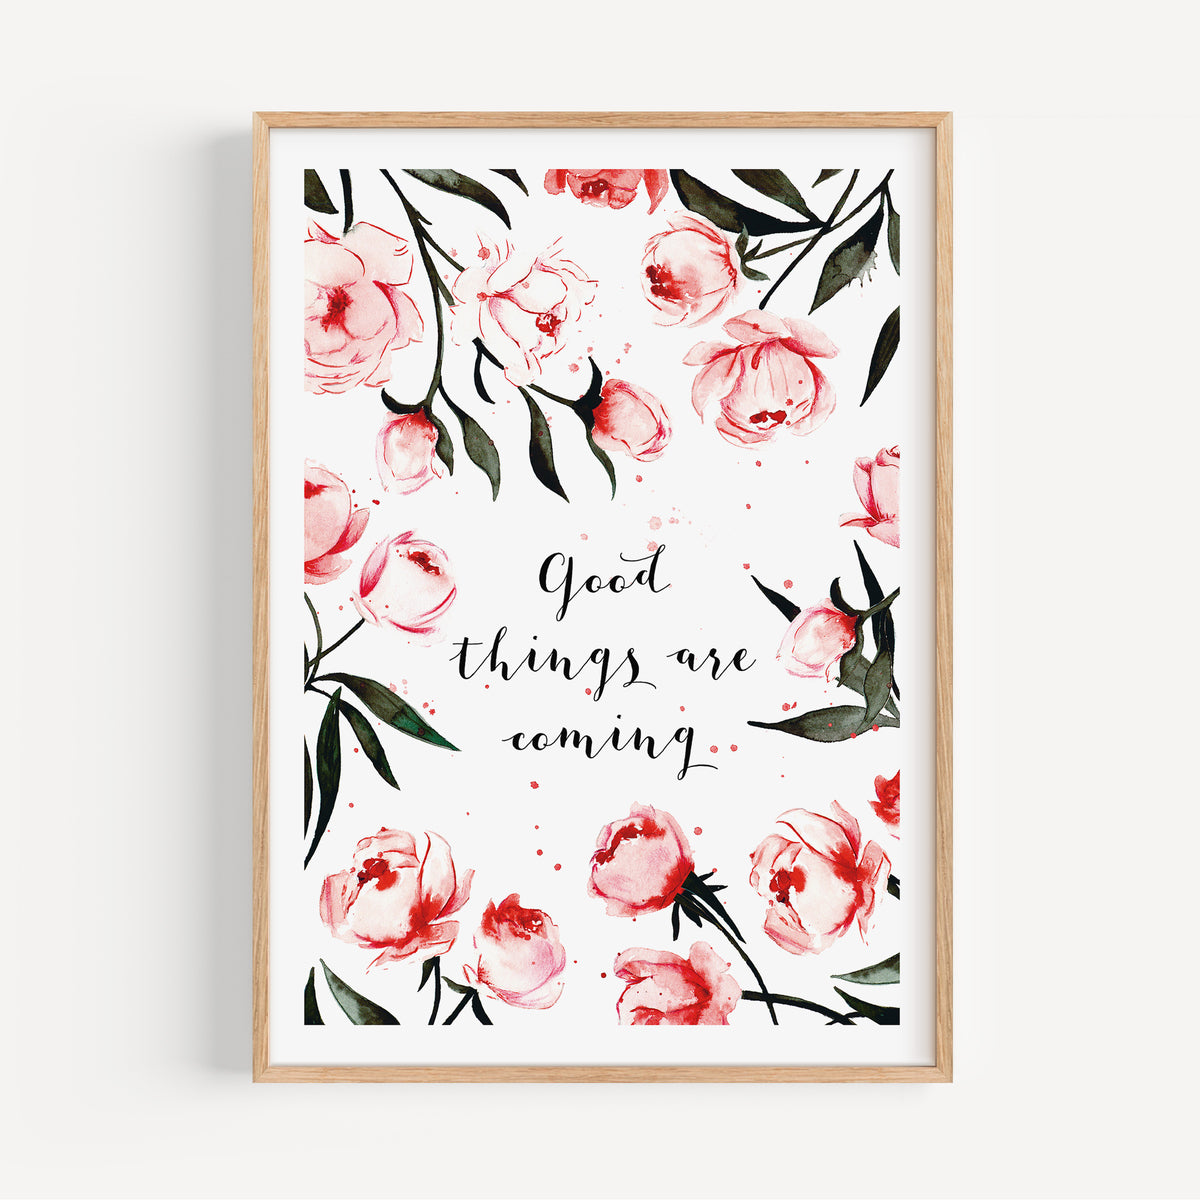 Art Print - Good things are coming